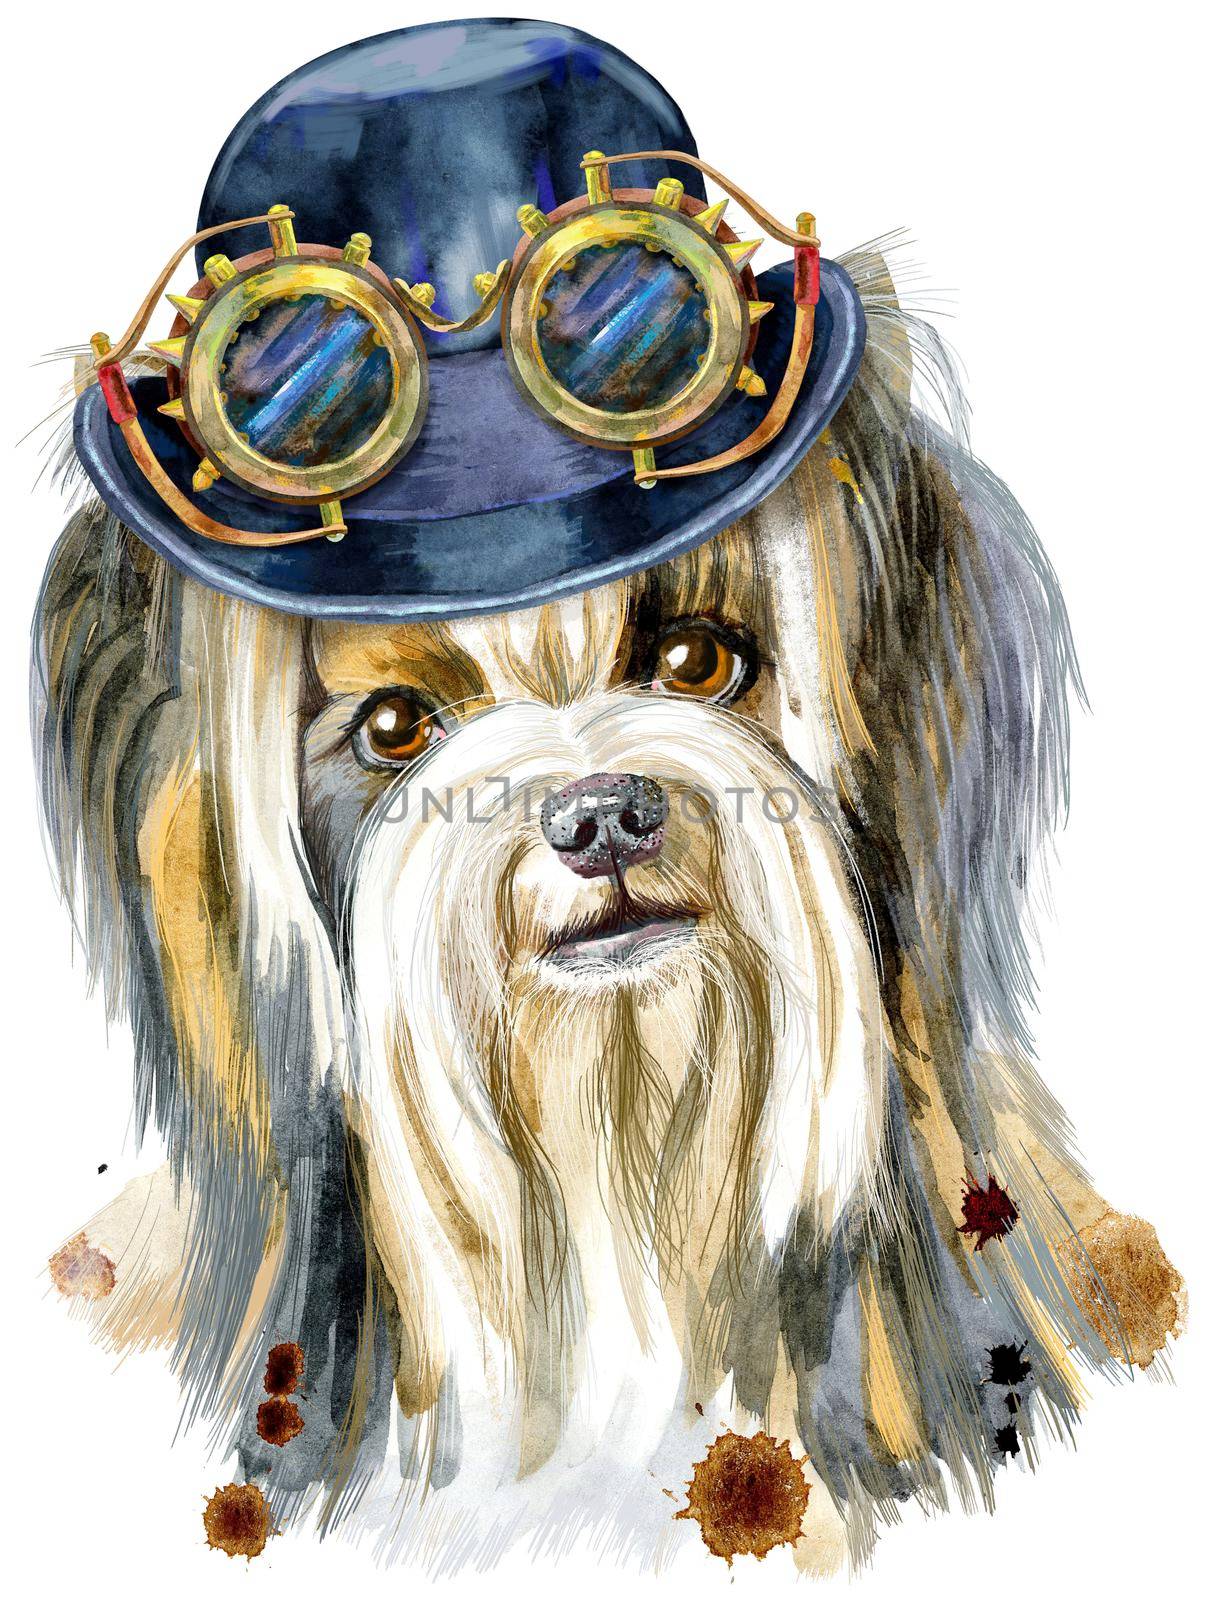 Dog, yorkie with hat bowler and steampunk glasses on white background. Hand drawn sweet pet illustration.